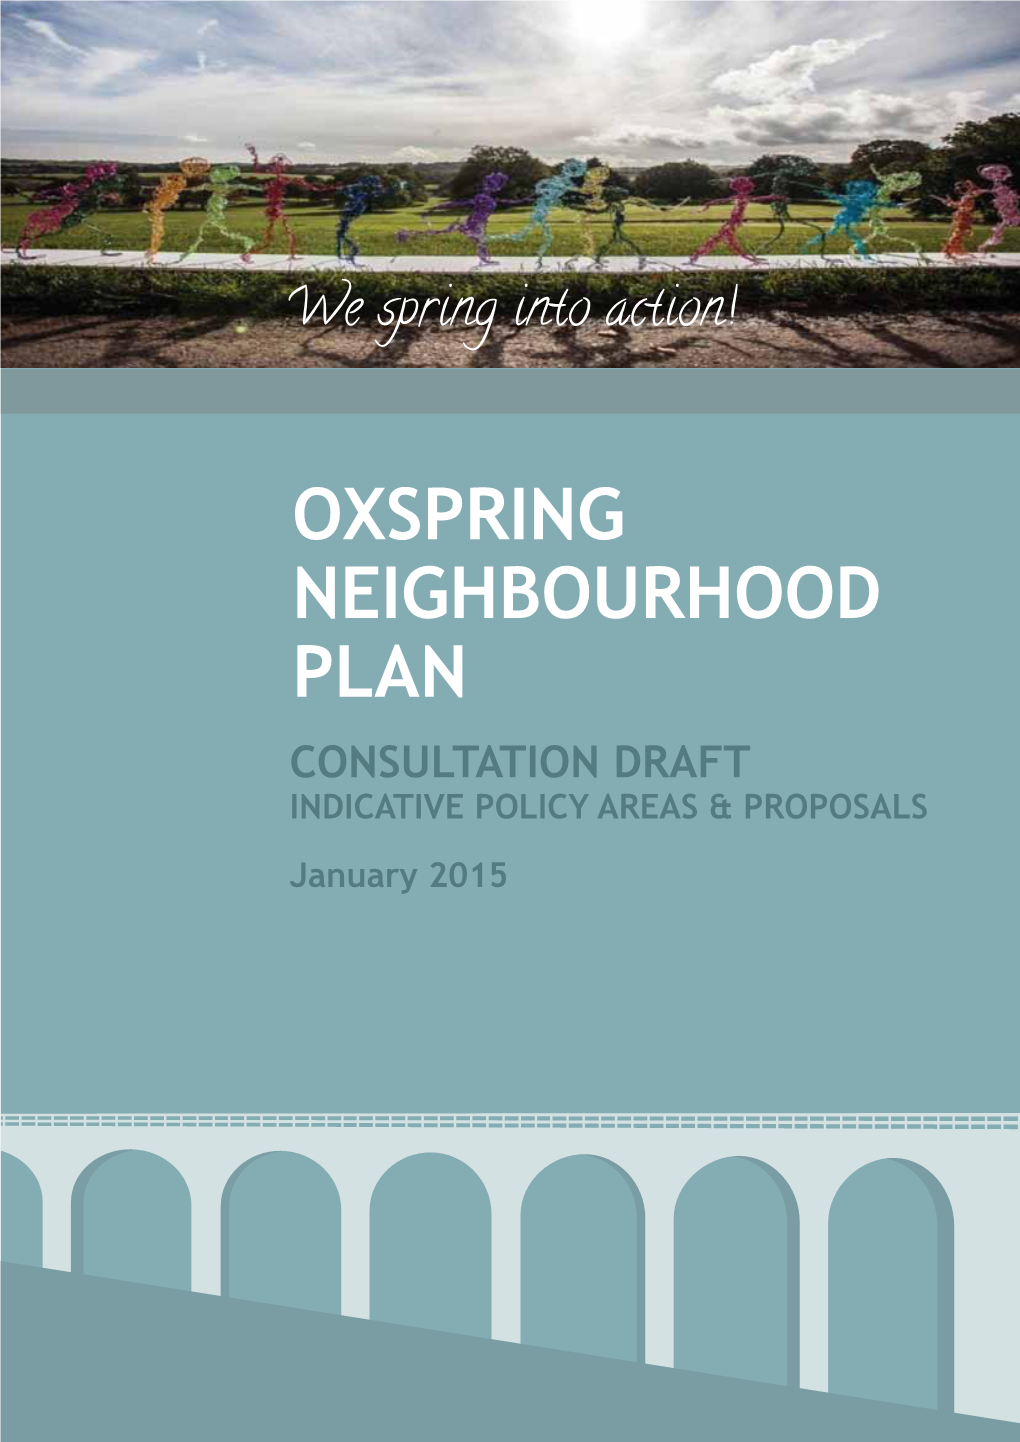 OXSPRING NEIGHBOURHOOD PLAN CONSULTATION DRAFT INDICATIVE POLICY AREAS & PROPOSALS January 2015 OXSPRING’S MASTER PLAN